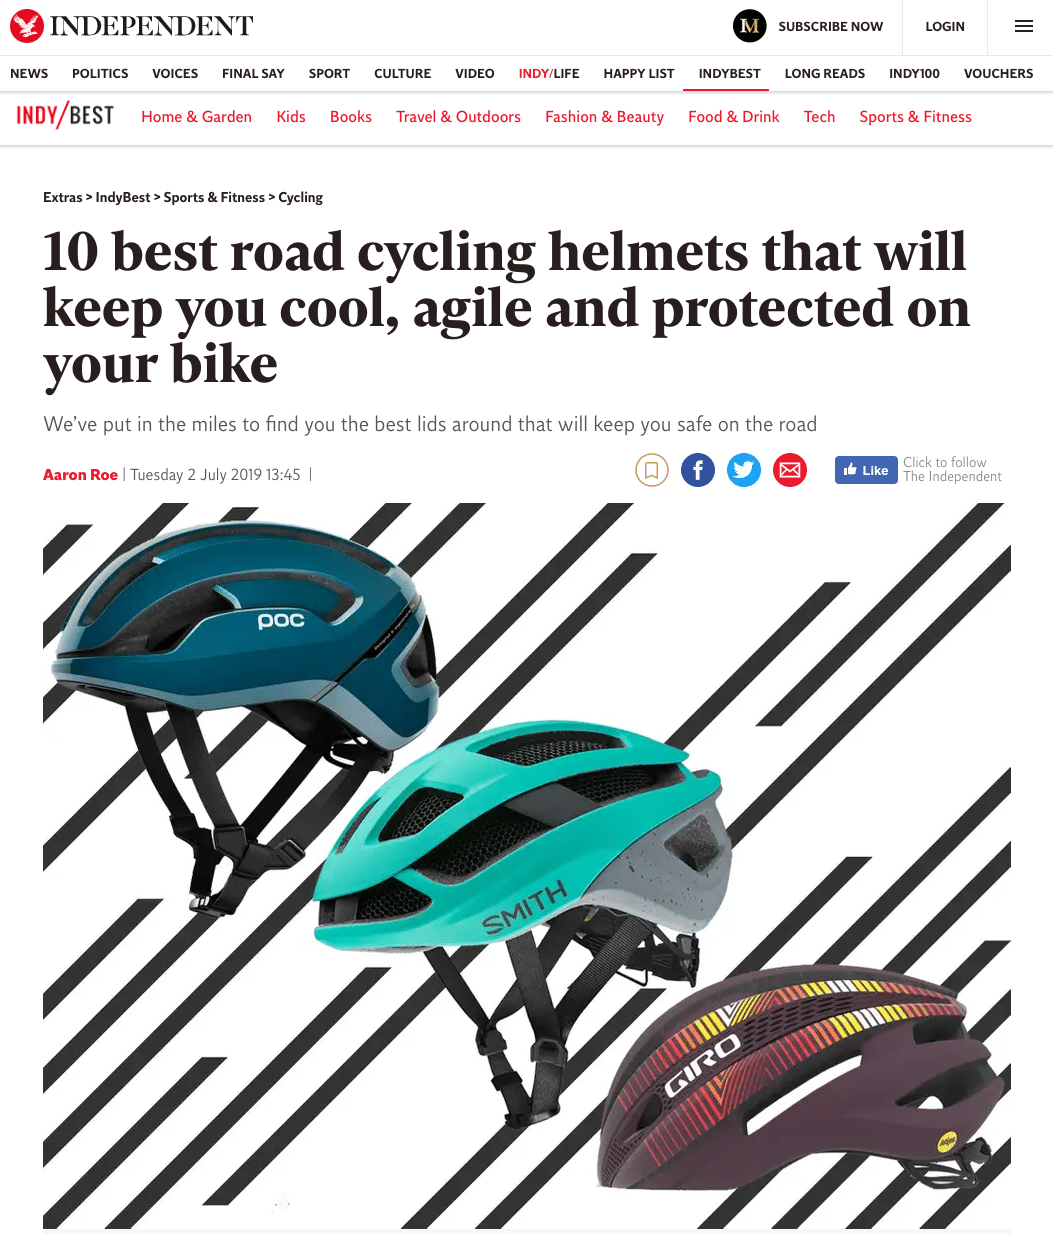 10-best-road-cycling-helmets-that-will-keep-you-cool-agile-and-protected-on-your-bike.png